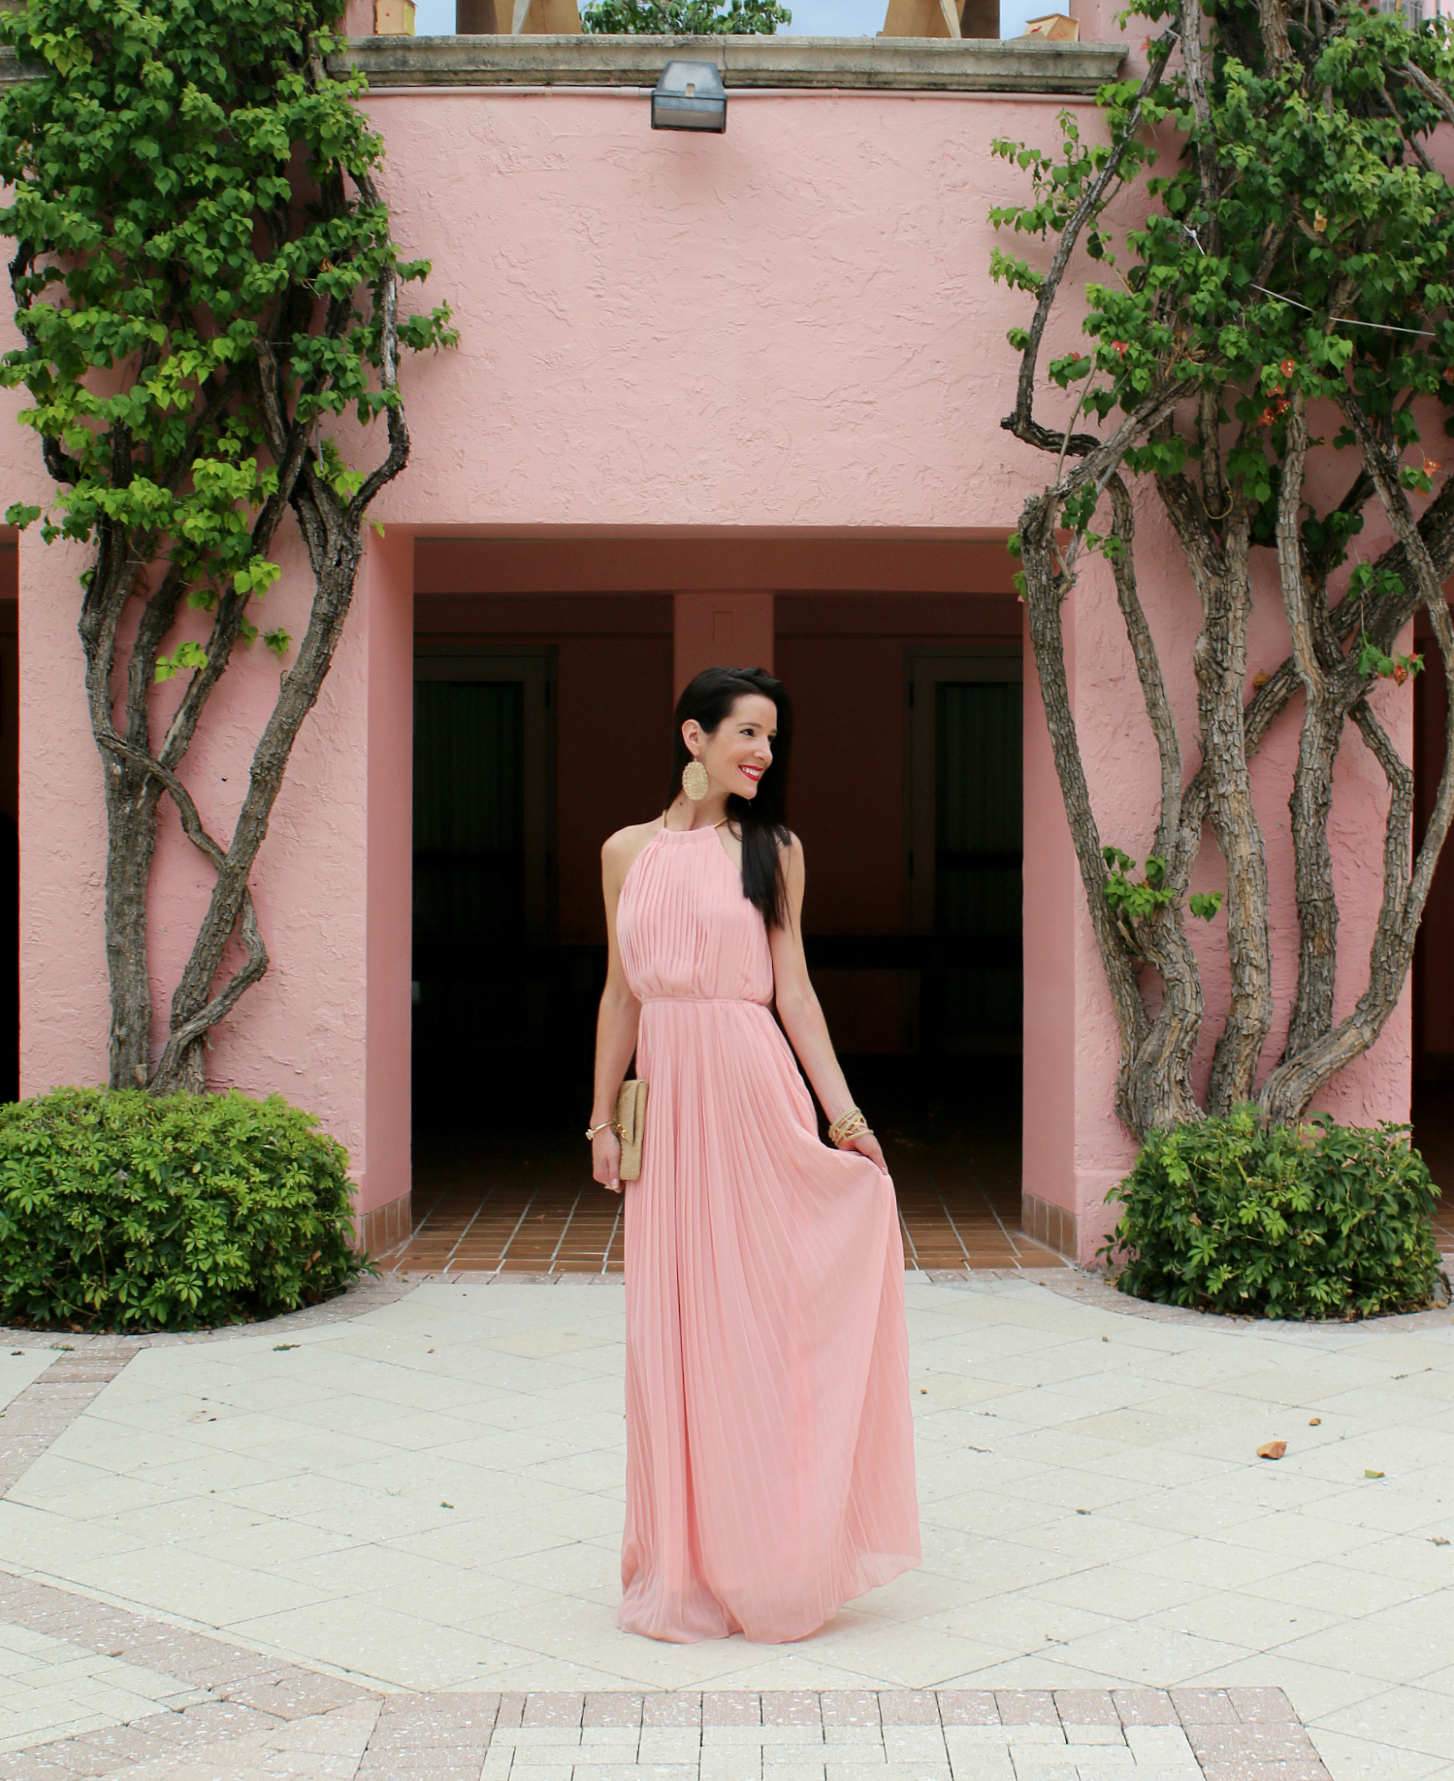 Best Dresses to Wear to a Spring Wedding by southern fashion blogger Stephanie Ziajka from Diary of a Debutante, spring wedding guest outfits, wedding guest dress ideas, dresses to wear to a spring wedding, pink pleated halter top maxi dress